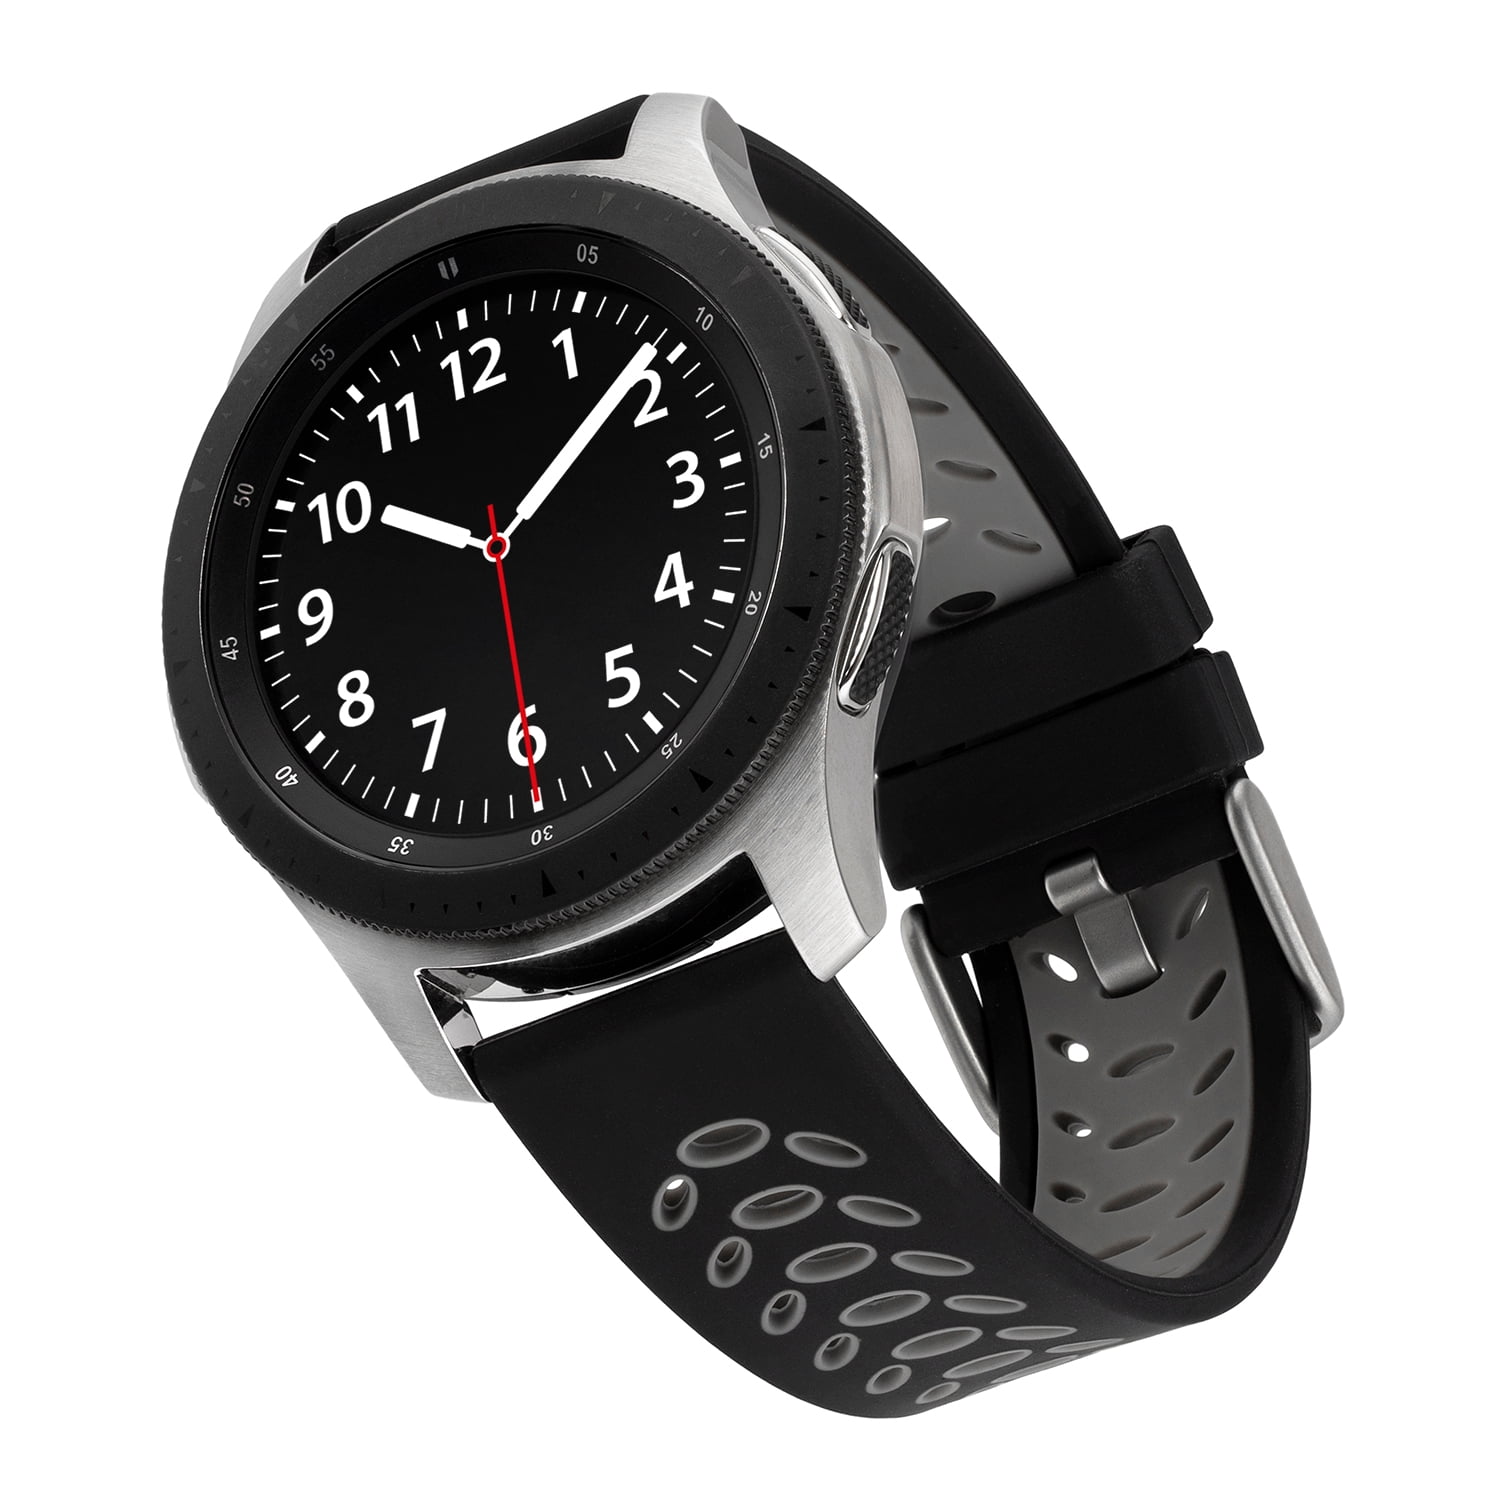 WITHit Black/Gray Sport Silicone Band for 22mm Samsung Universal Watch